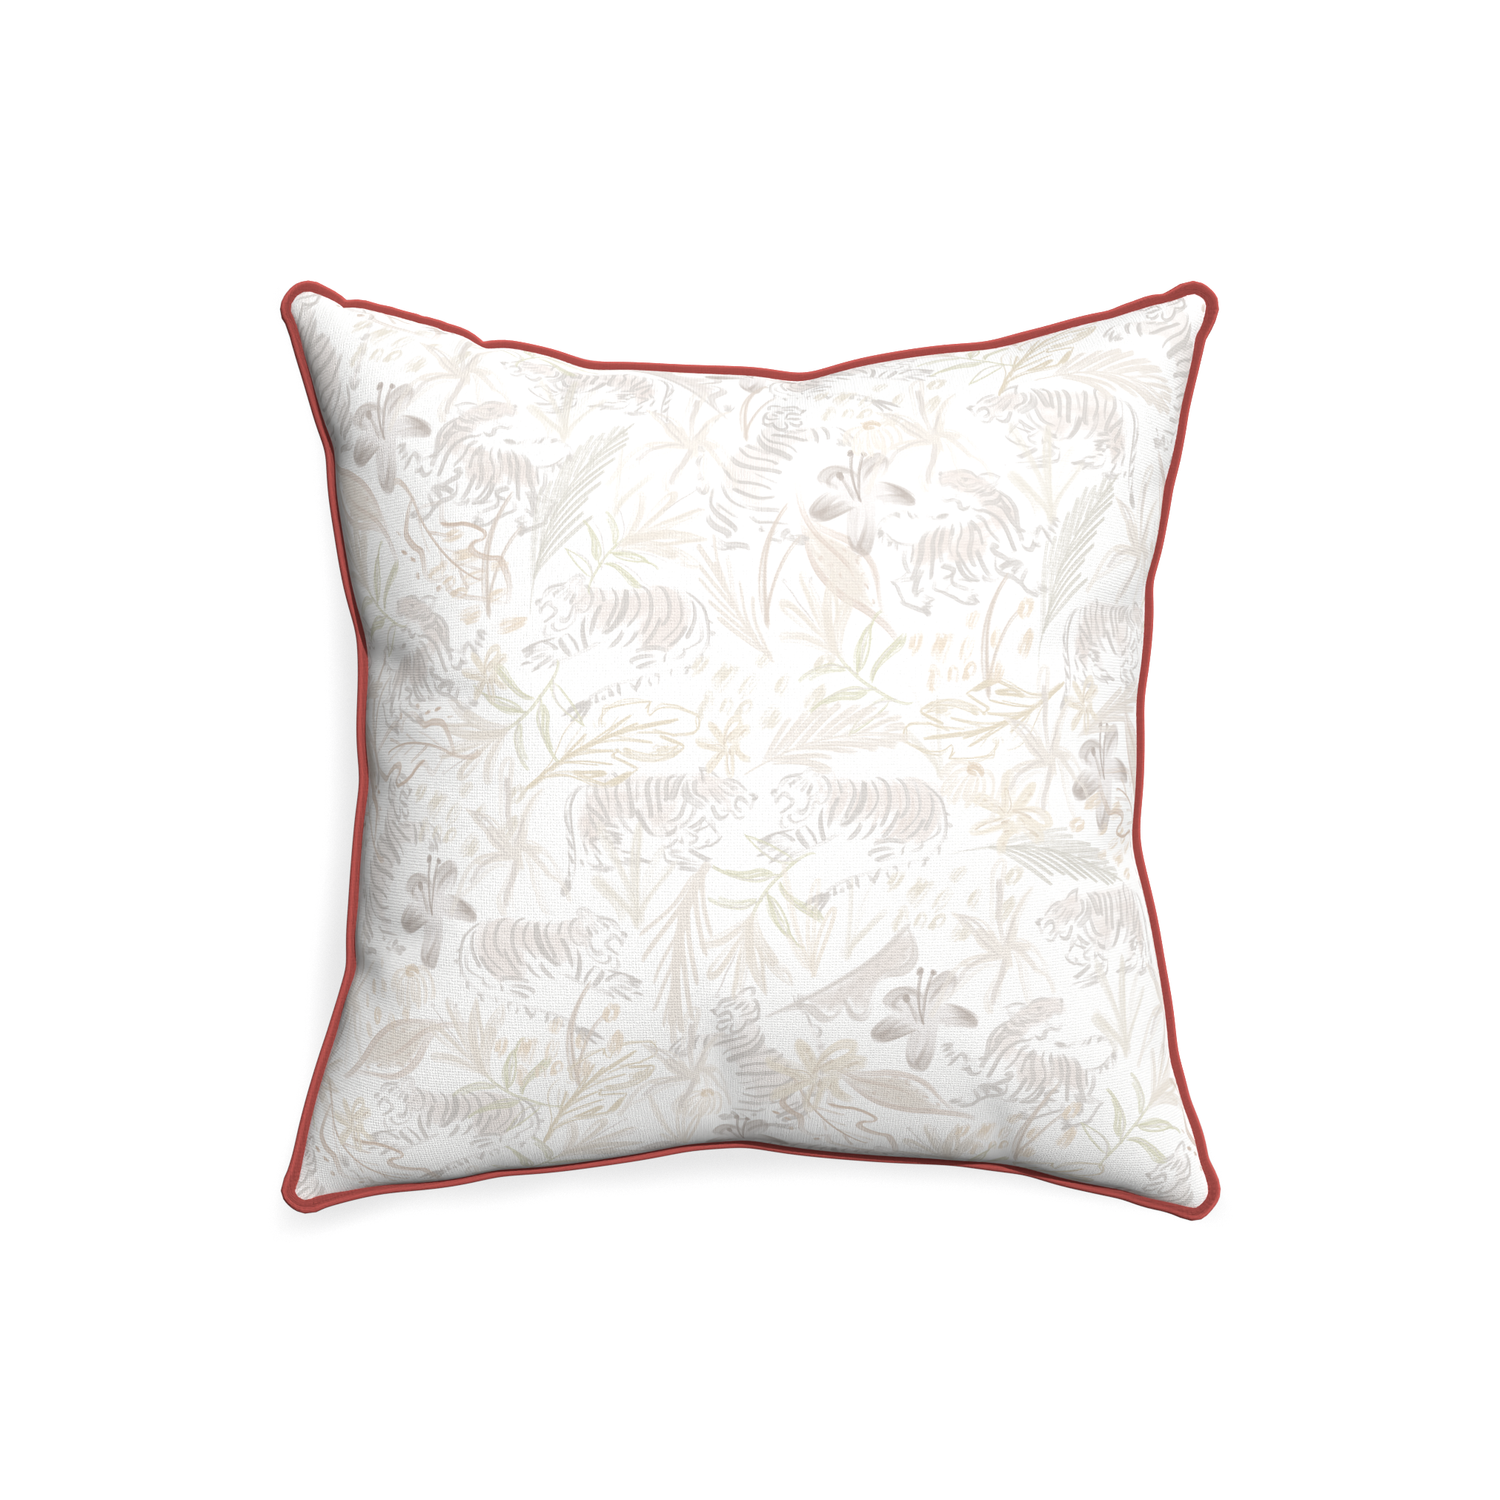 20-square frida sand custom beige chinoiserie tigerpillow with c piping on white background